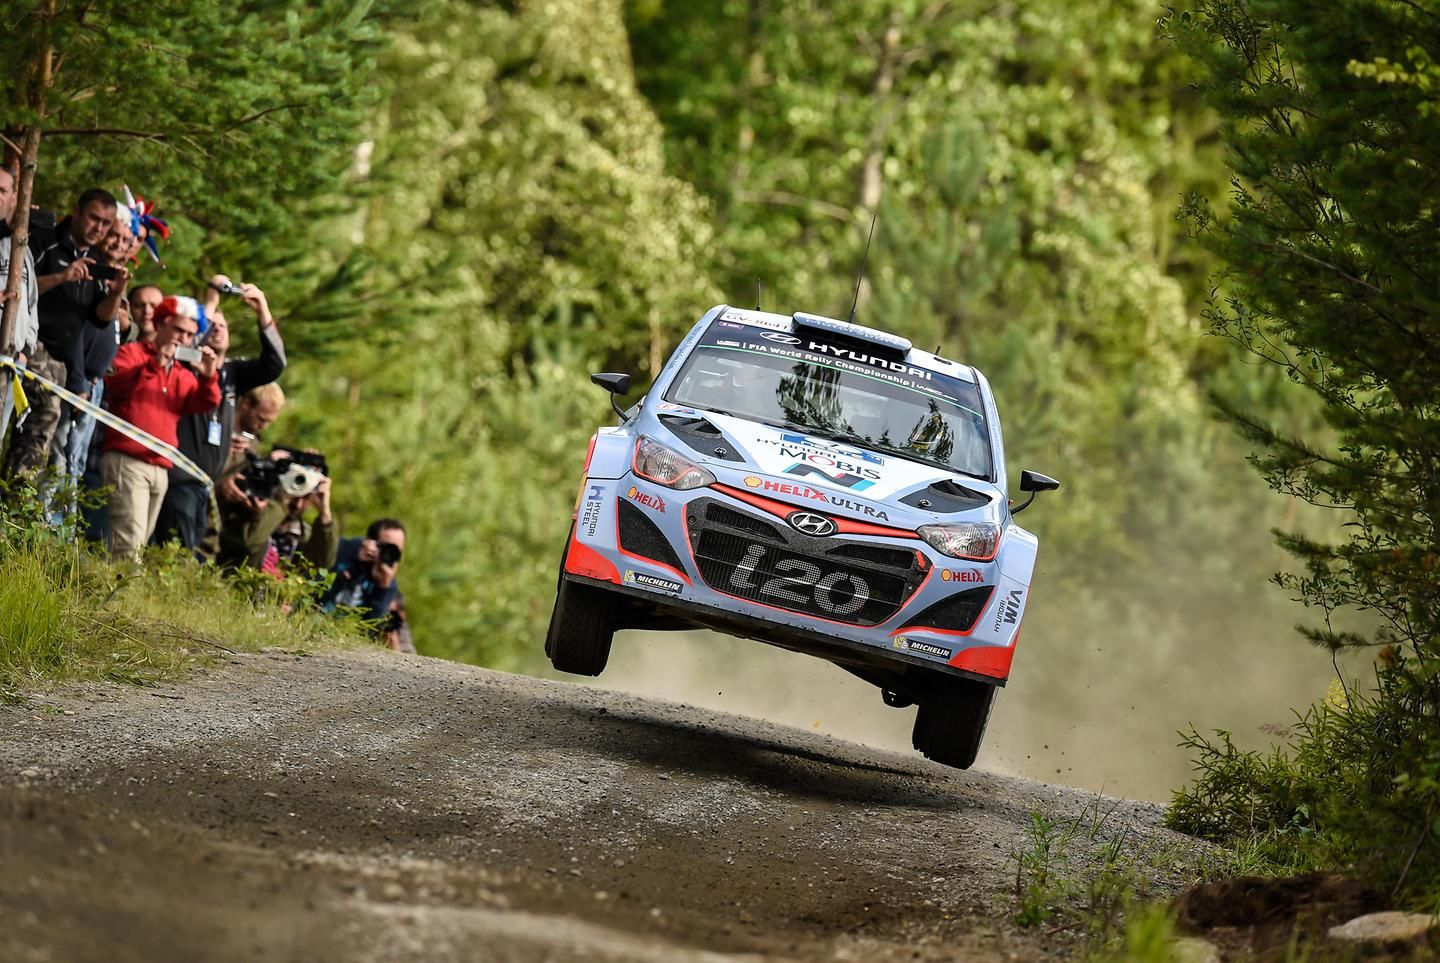 Mission accomplished for Hyundai Motorsport with top-four finish in Finland